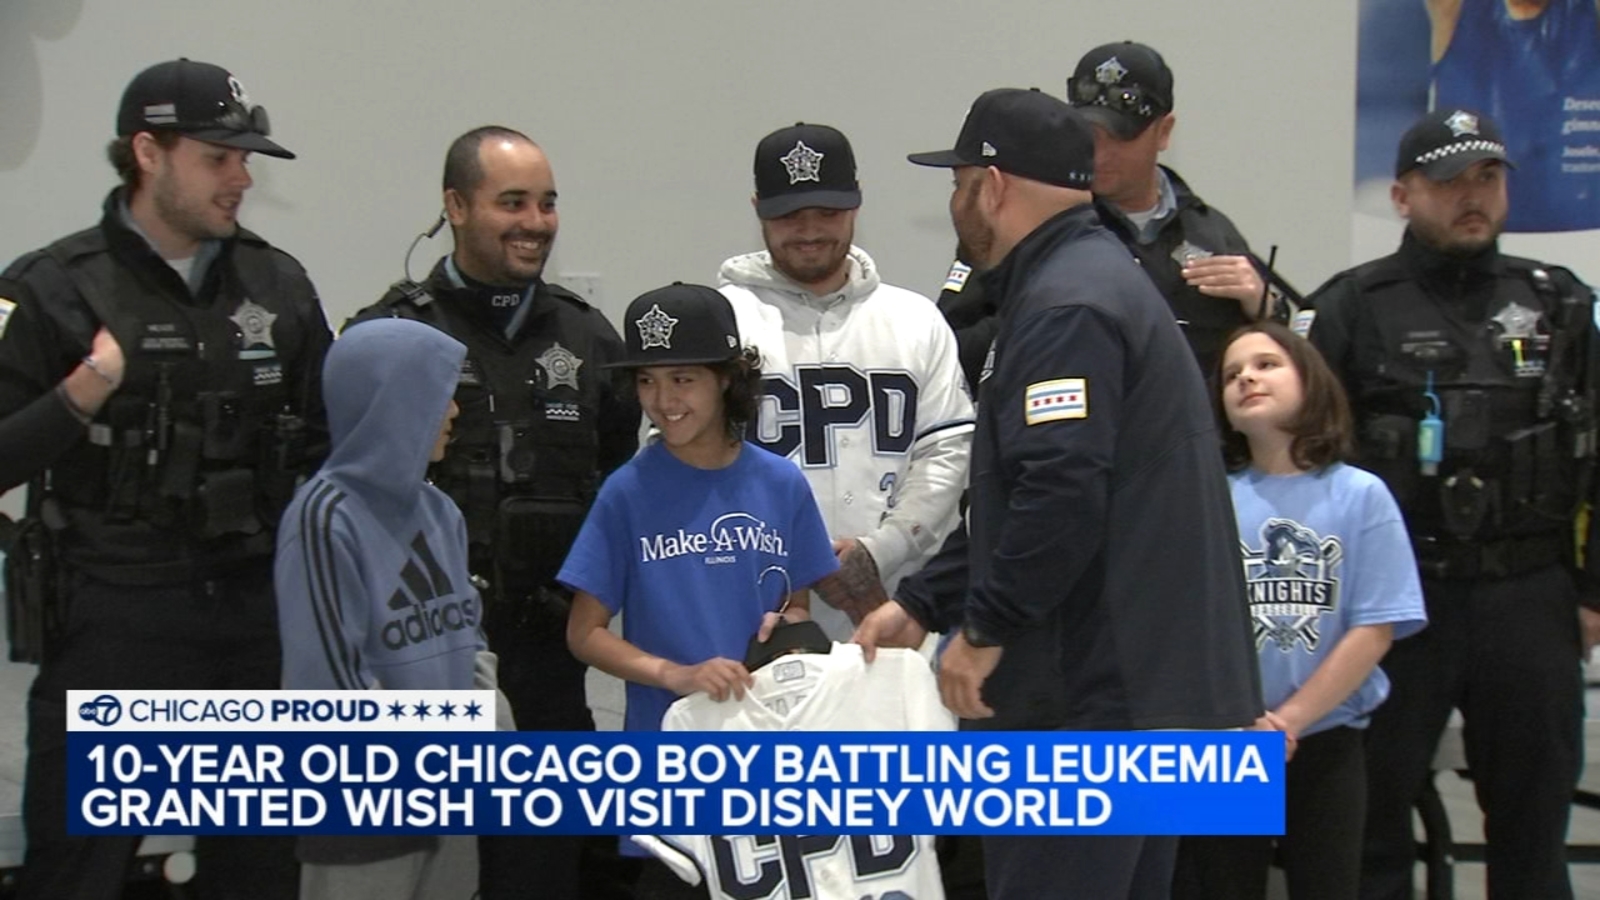 Chicago boy with leukemia cancer, Jonathan Alejandres becomes honorary CPD Knights baseball team member, granted Disney World trip [Video]